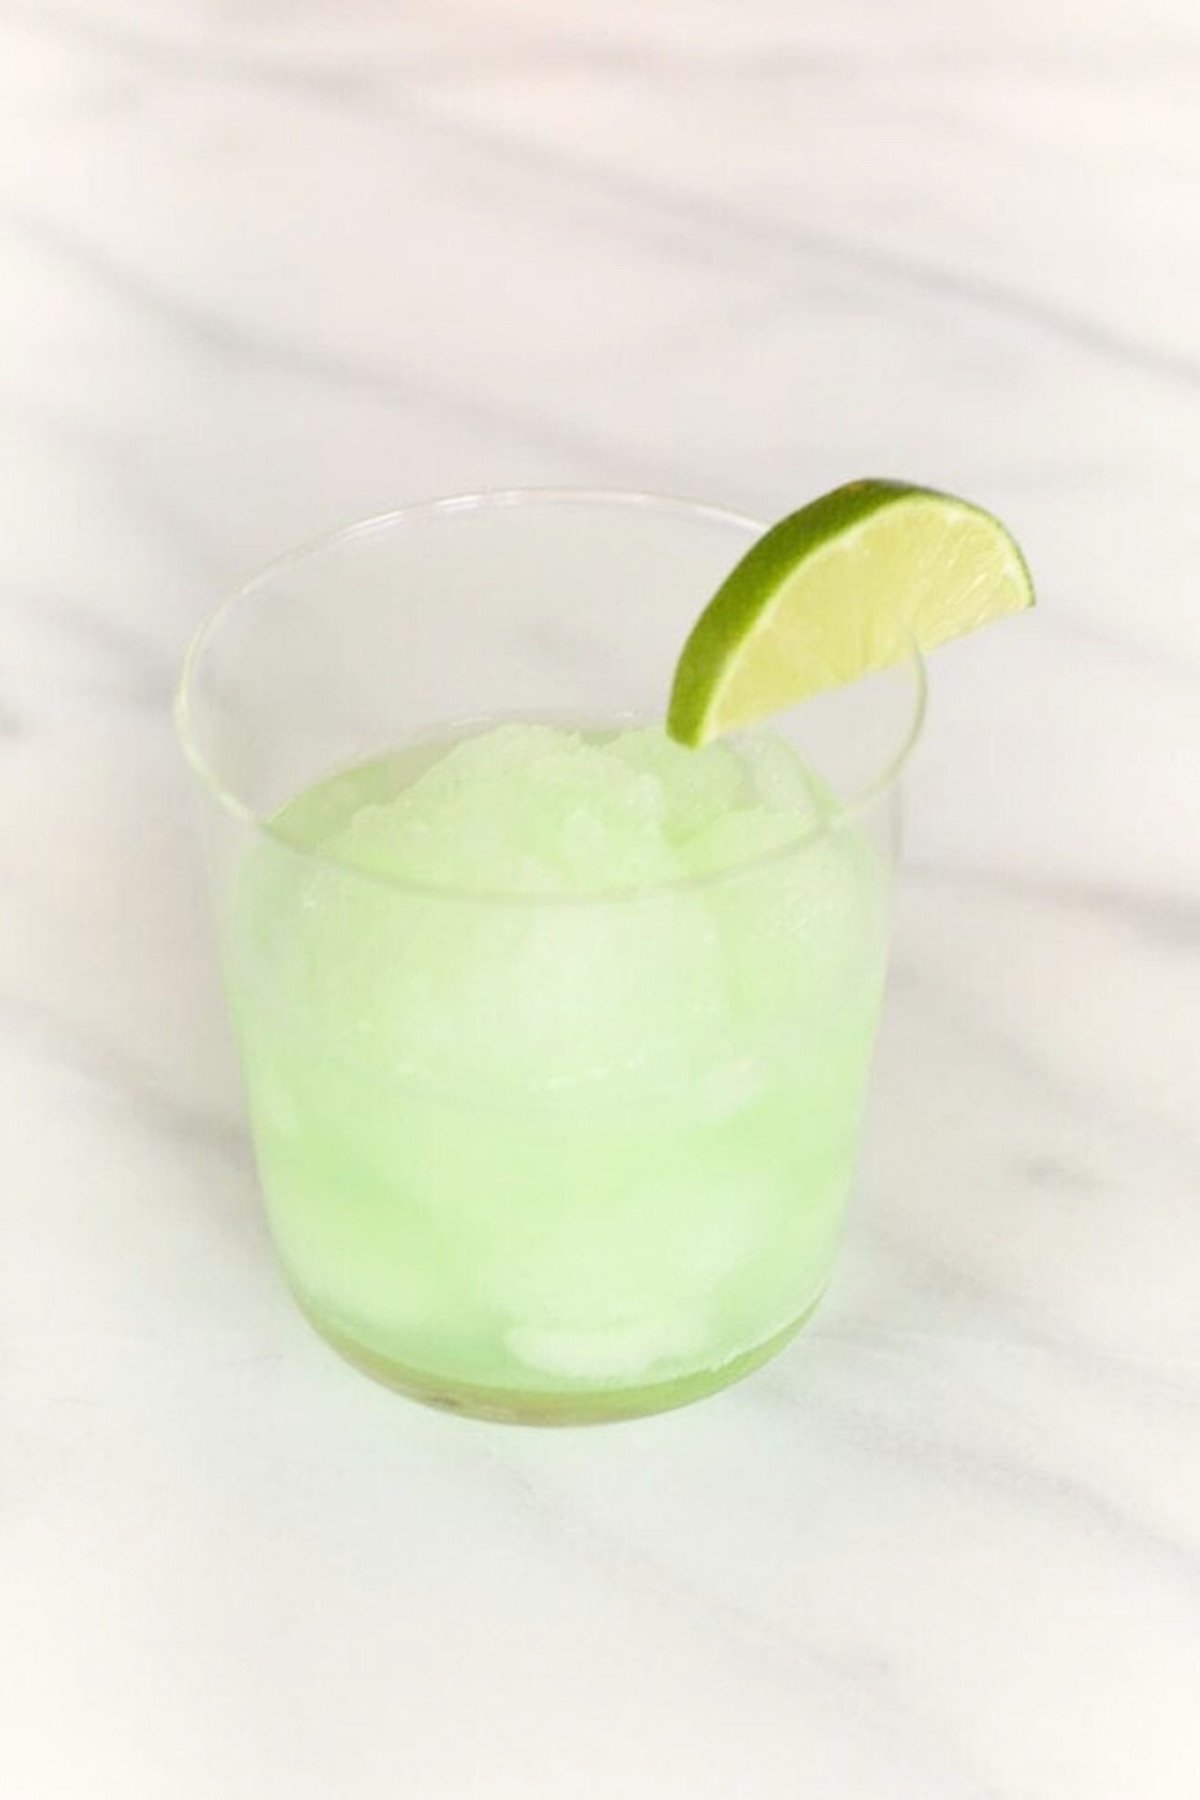 A glass filled with light green, shaved ice garnished with a slice of lime on the rim, creating a refreshing margarita float.